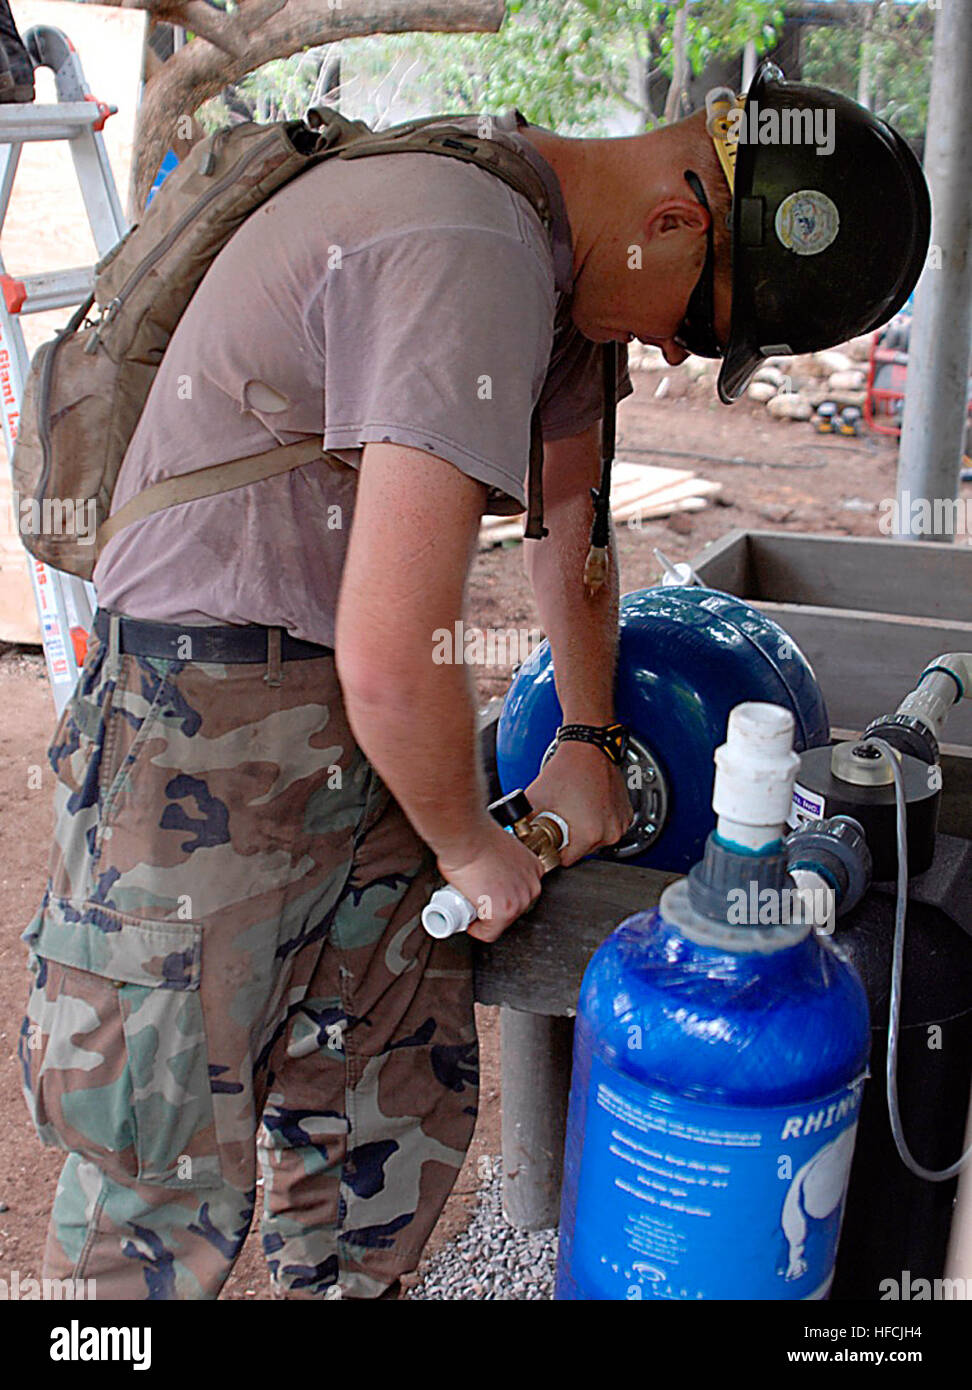 Utilitiesman 3rd Class Tomas Thompson, assigned to Construction Battalion Maintenance Unit 303, embarked aboard the amphibious assault ship USS Boxer (LHD 4), places finishing touches on a kitchen water purifier during the restoration of the Canton el Sunza school house during Continuing Promise 2008. Boxer is deployed supporting the Pacific phase of CP, an equal partnership mission between the United States, Guatemala, El Salvador and Peru. Operations aboard USS Boxer 91656 Stock Photo